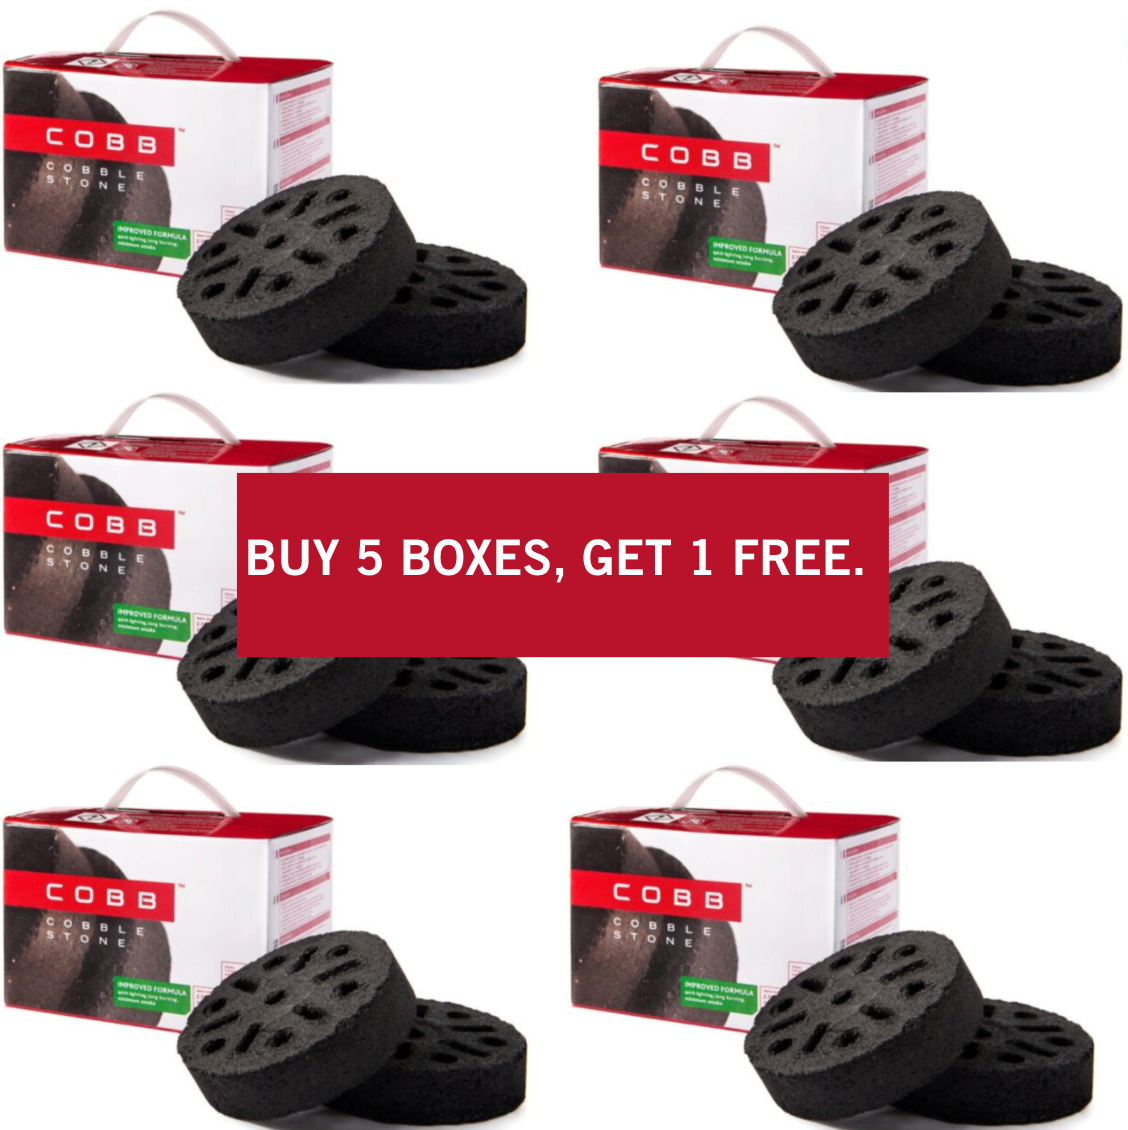 COBBLESTONES - BUY 5, GET THE 6th BOX FOR FREE.